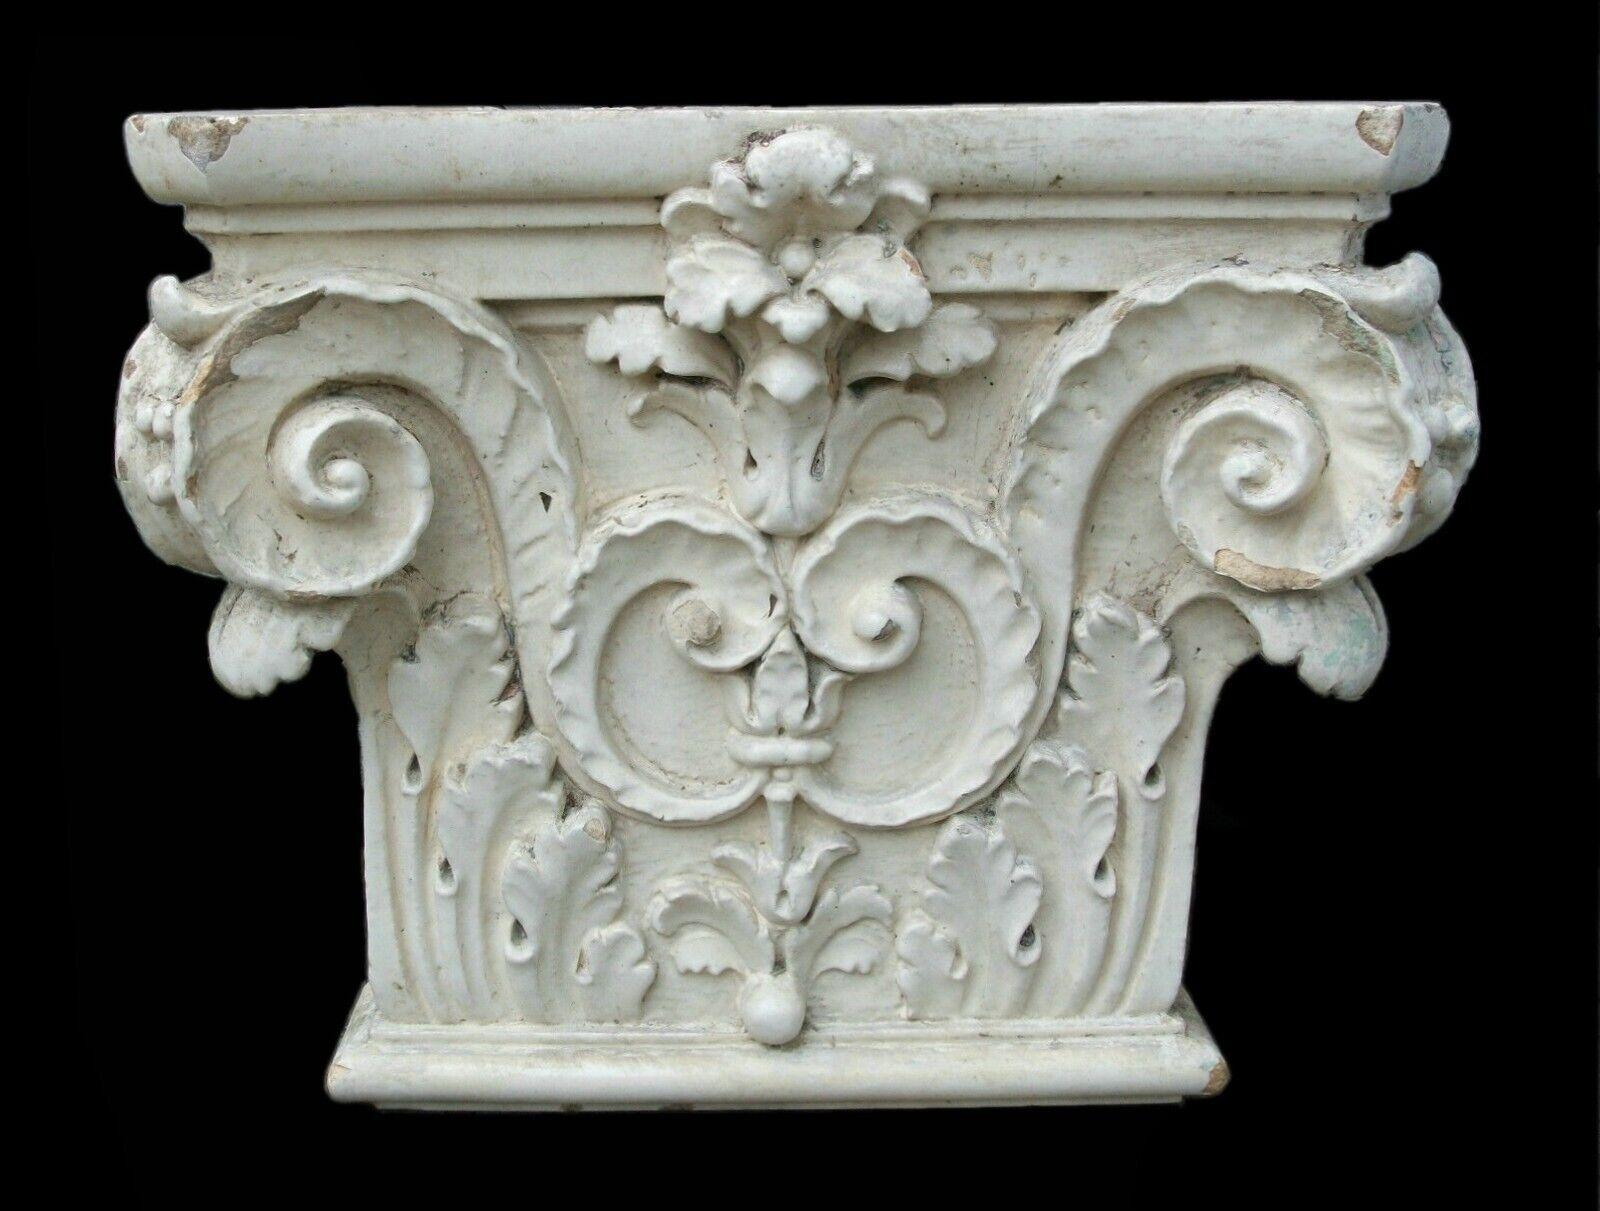 Antique Architectural Corinthian Capital - glazed cast ceramic composition - Canada or United States - late 19th century.

Good antique condition - chips/loss to the body & glaze - grime that comes with age - concrete residue - very heavy (greater